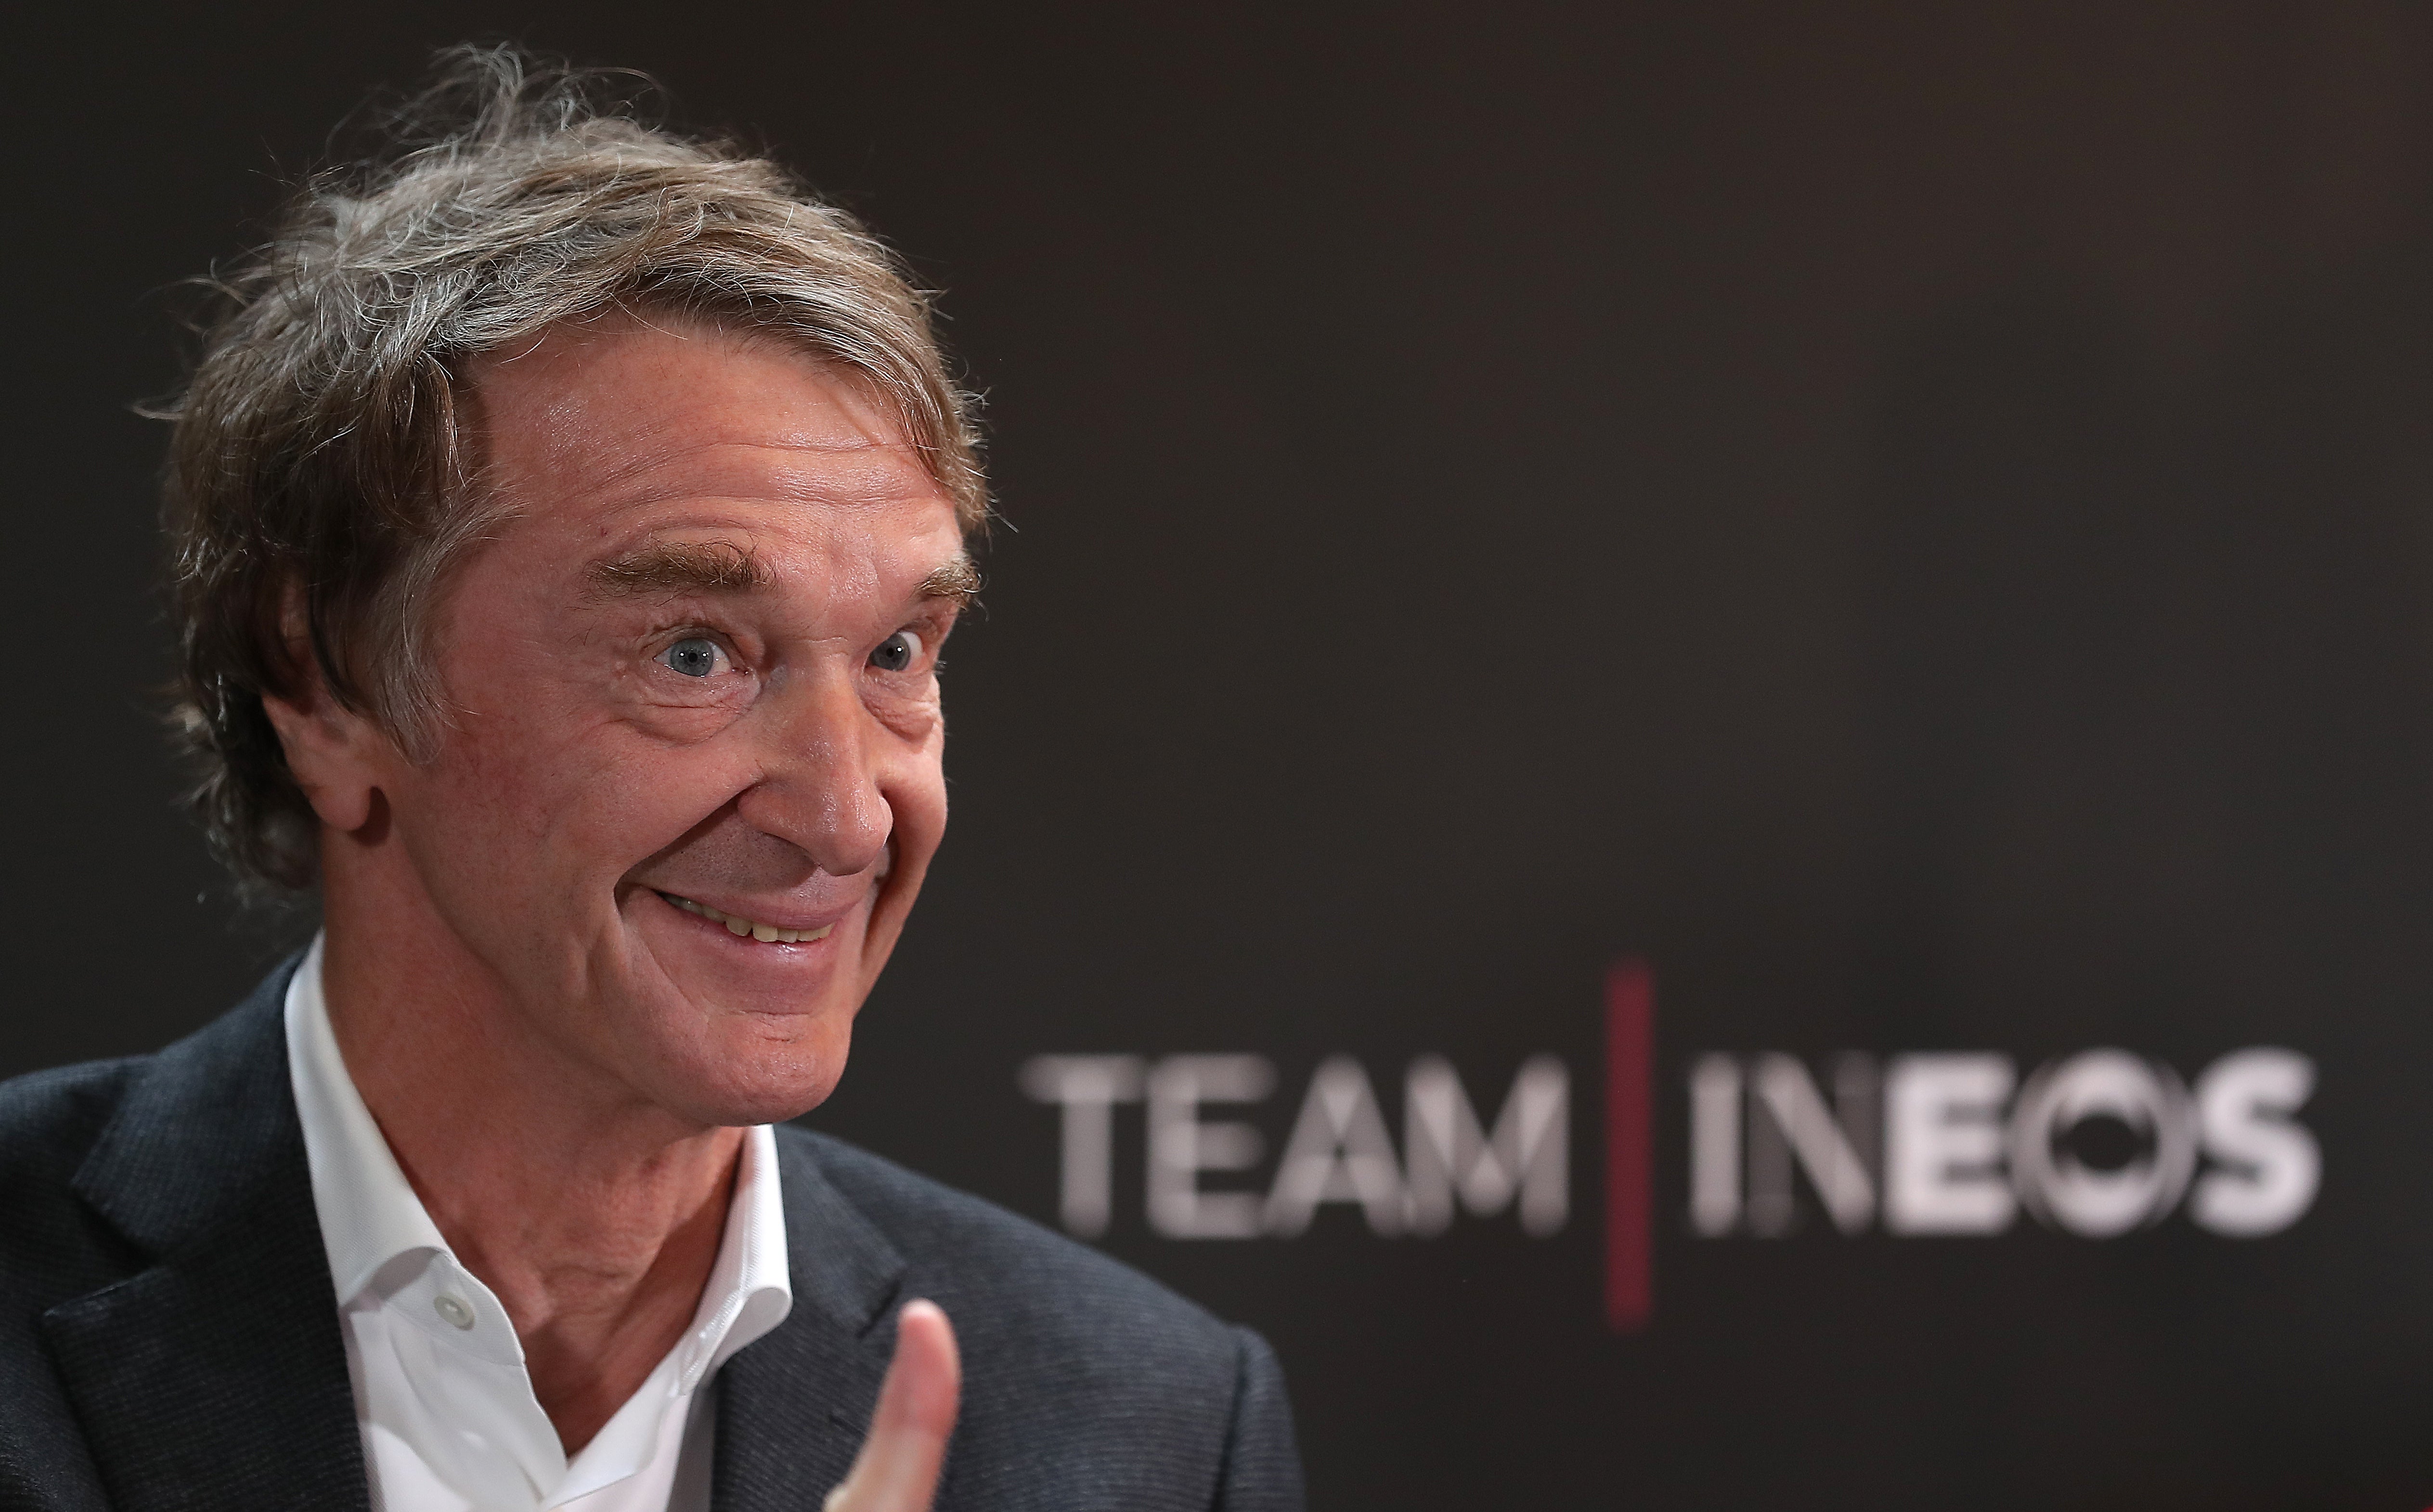 Sir Jim Ratcliffe, pictured, has previously been linked to the Blues (Martin Rickett/PA)